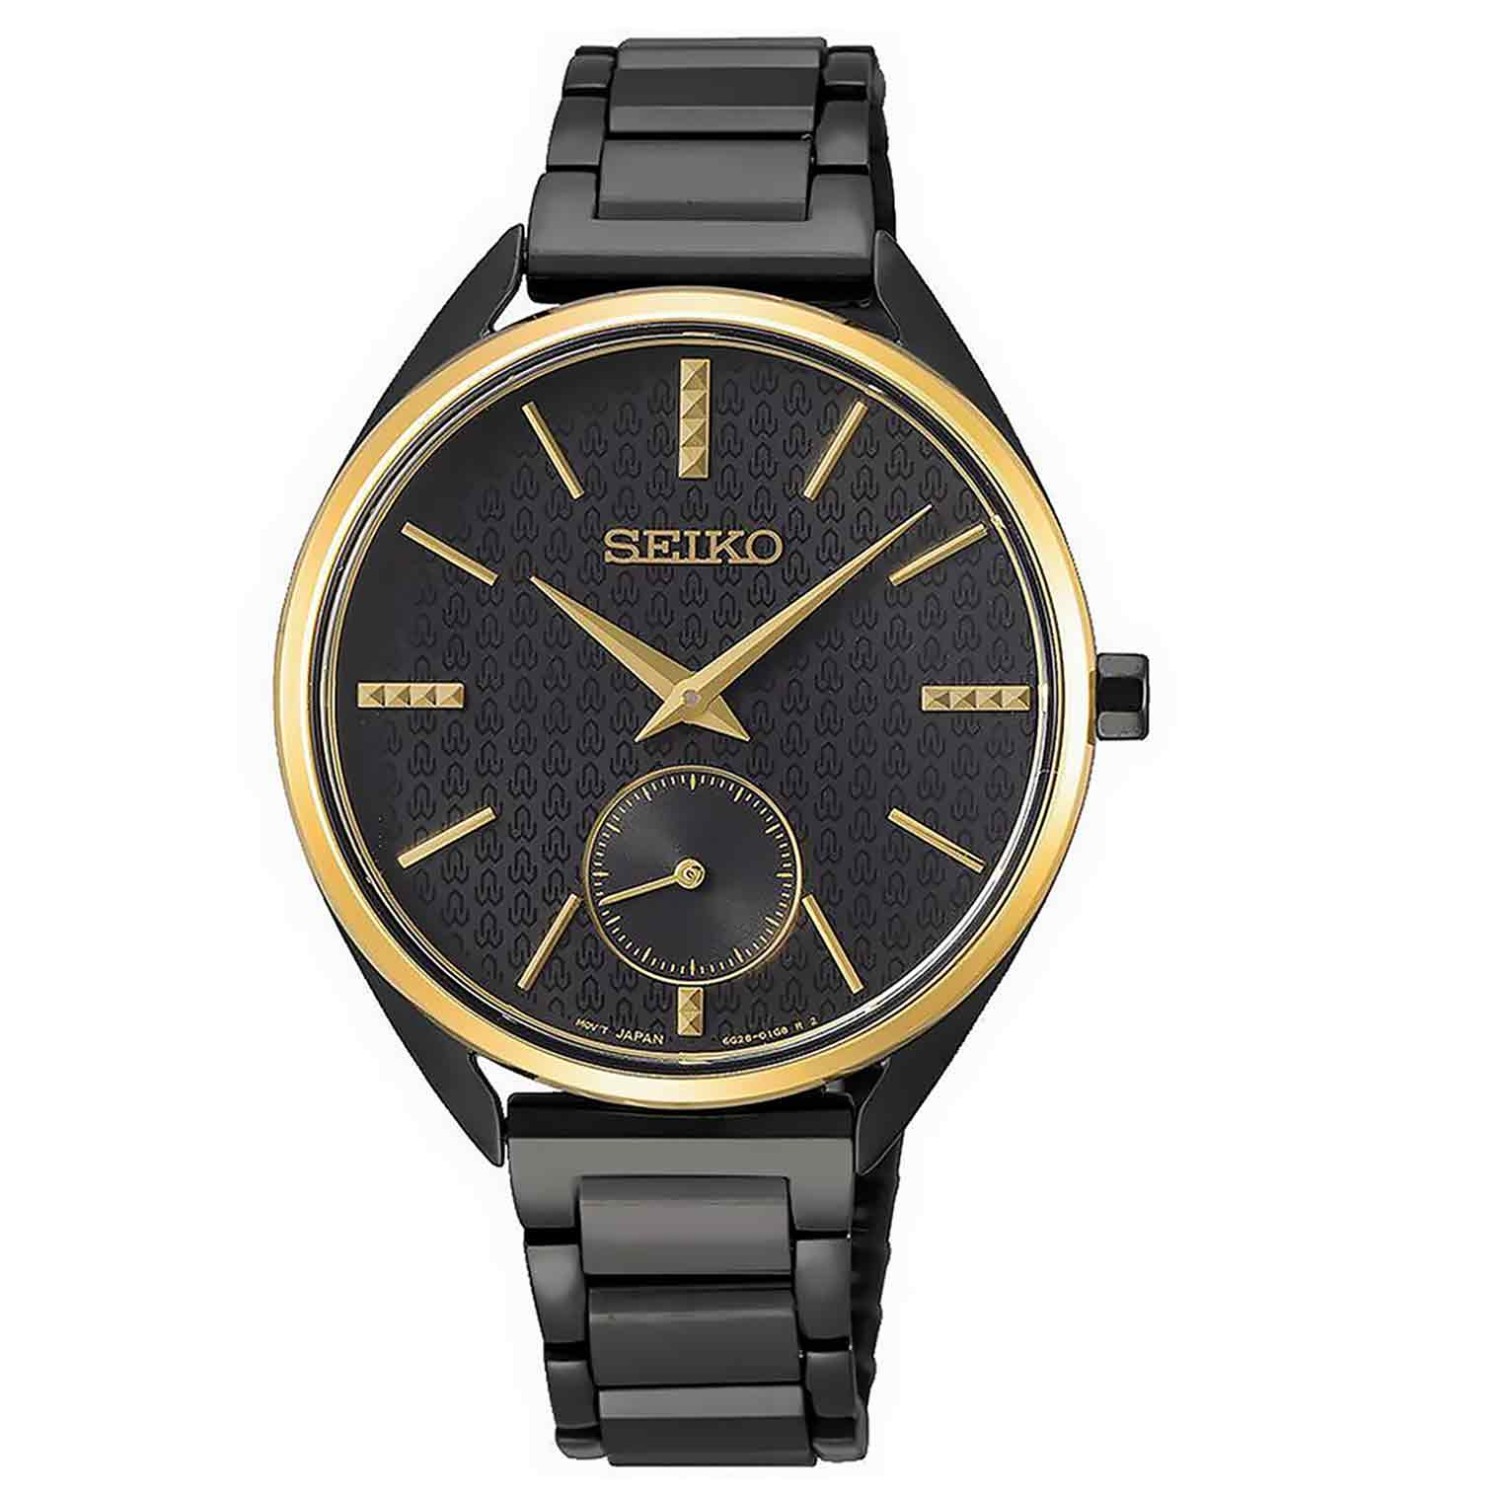 SRKZ49P SEIKO 50TH Anniversary Special Edition Black Dial Black Watch. The SEIKO SRKZ49P was made to celebrate the 50th anniversary of the worlds first quartz watch, the Seiko Astron from 1969. This special edition watch features a specially engraved case